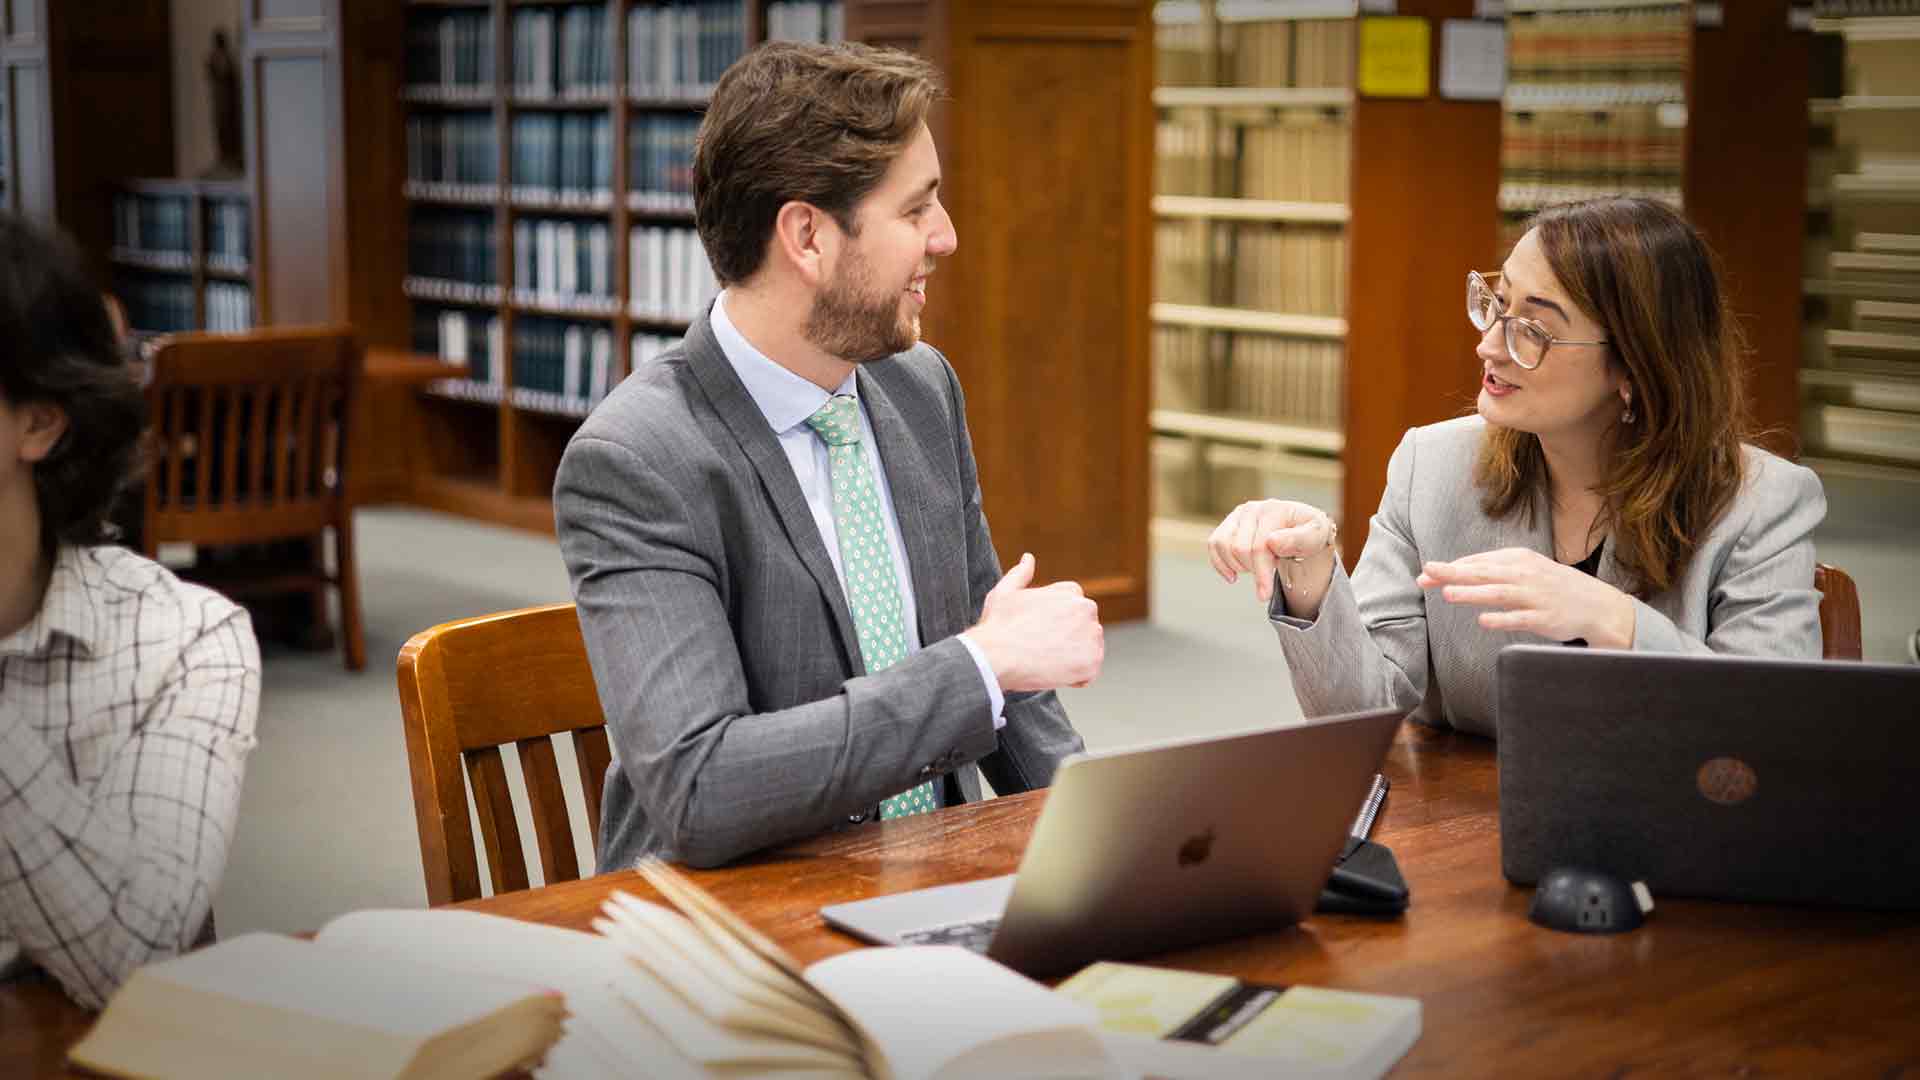 Students have discussion in law library